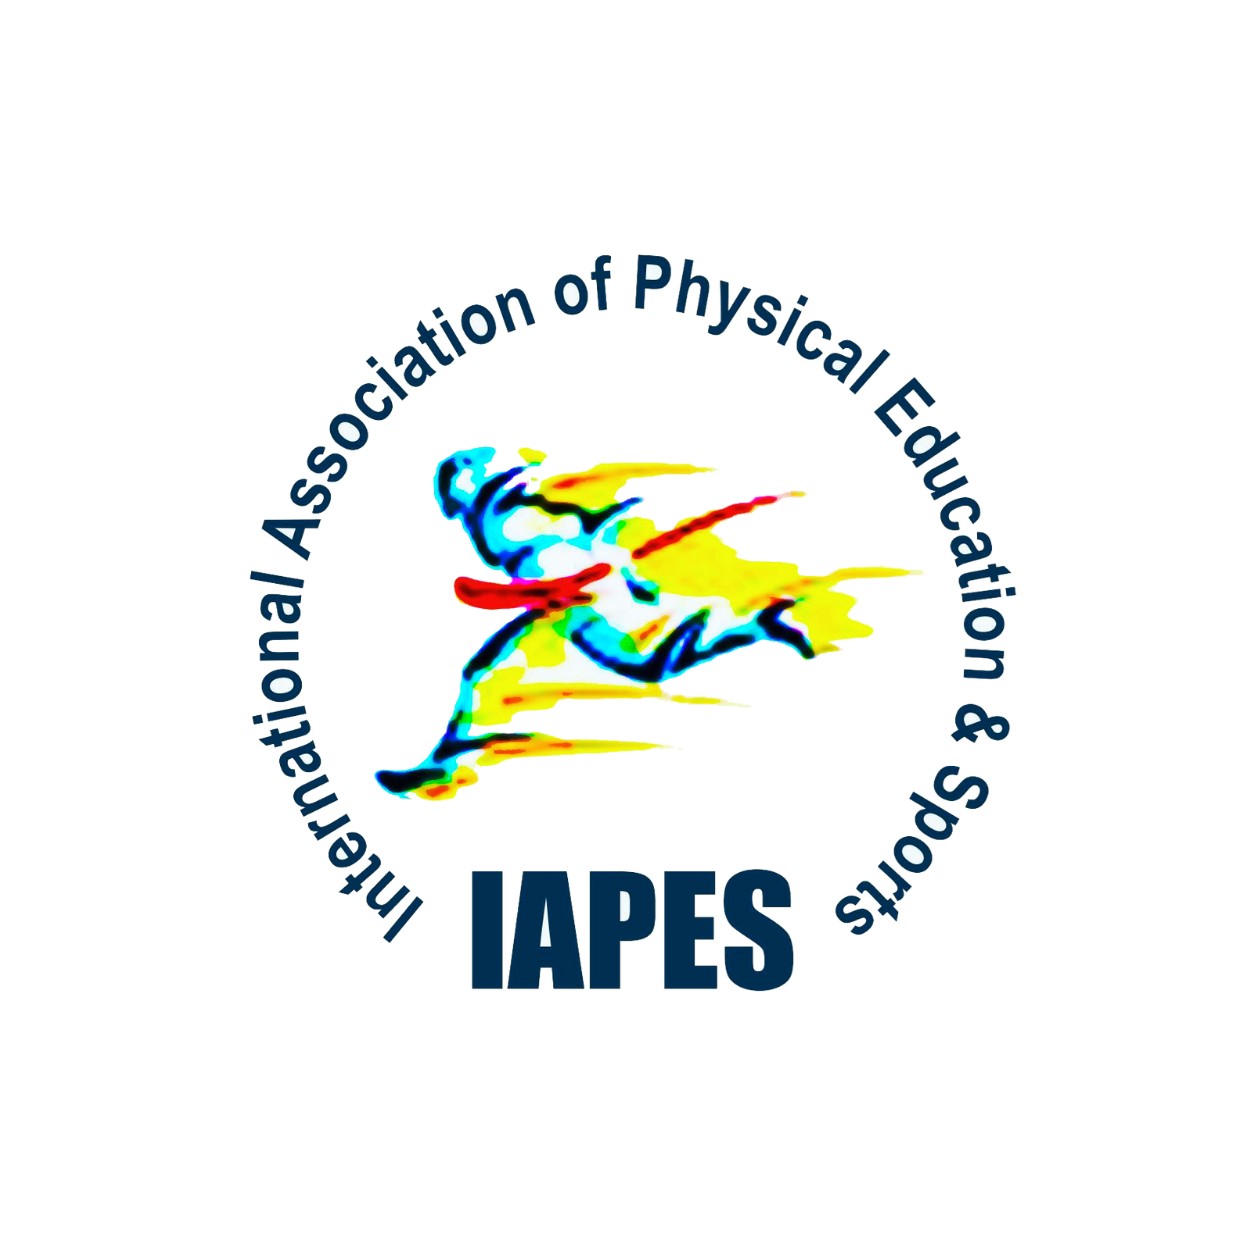 International Association of Physical Education and Sports, IAPES